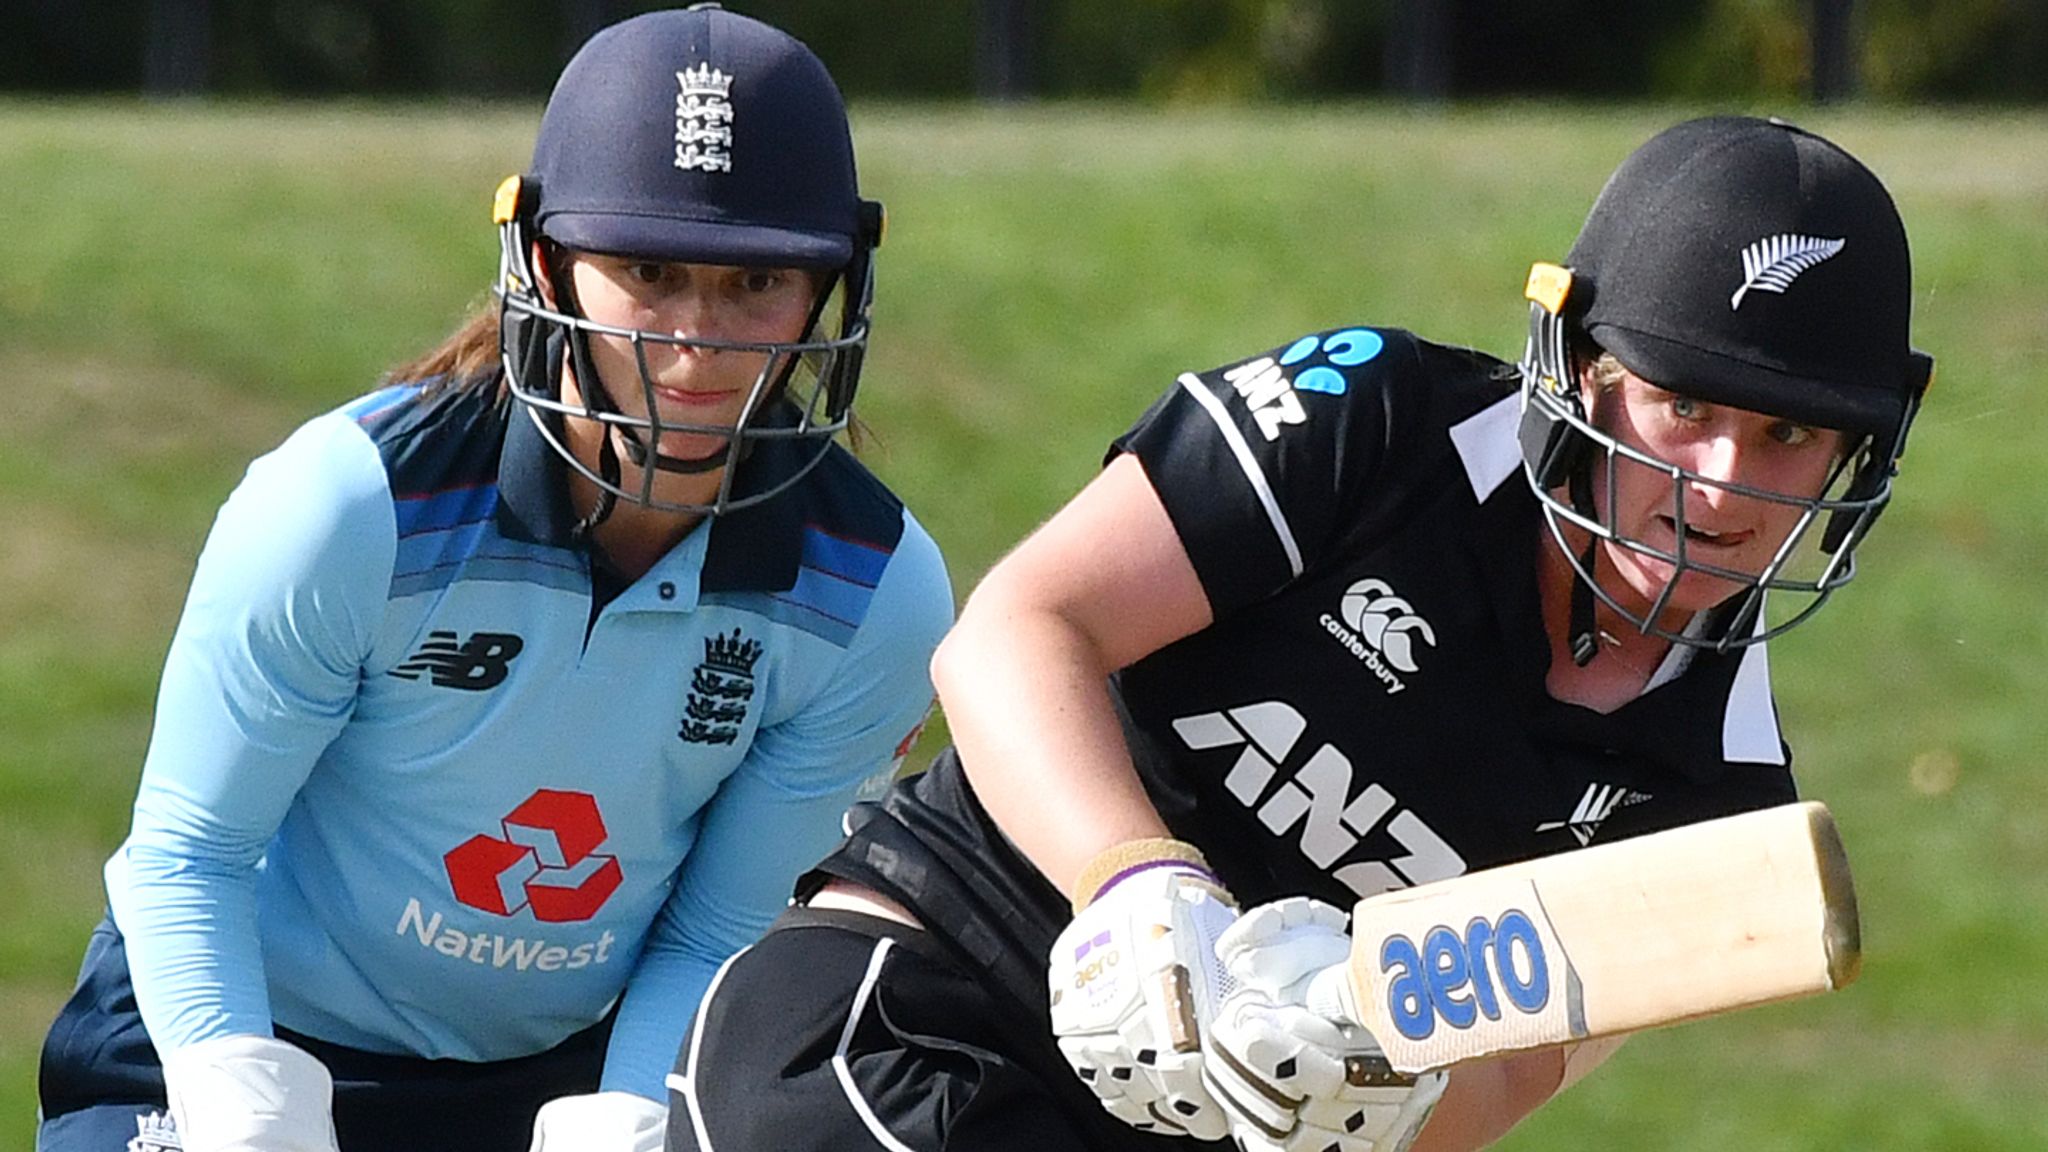 England Women: Last ODI and first two matches of T20 series vs New Zealand to be behind closed doors | Cricket News | Sky Sports